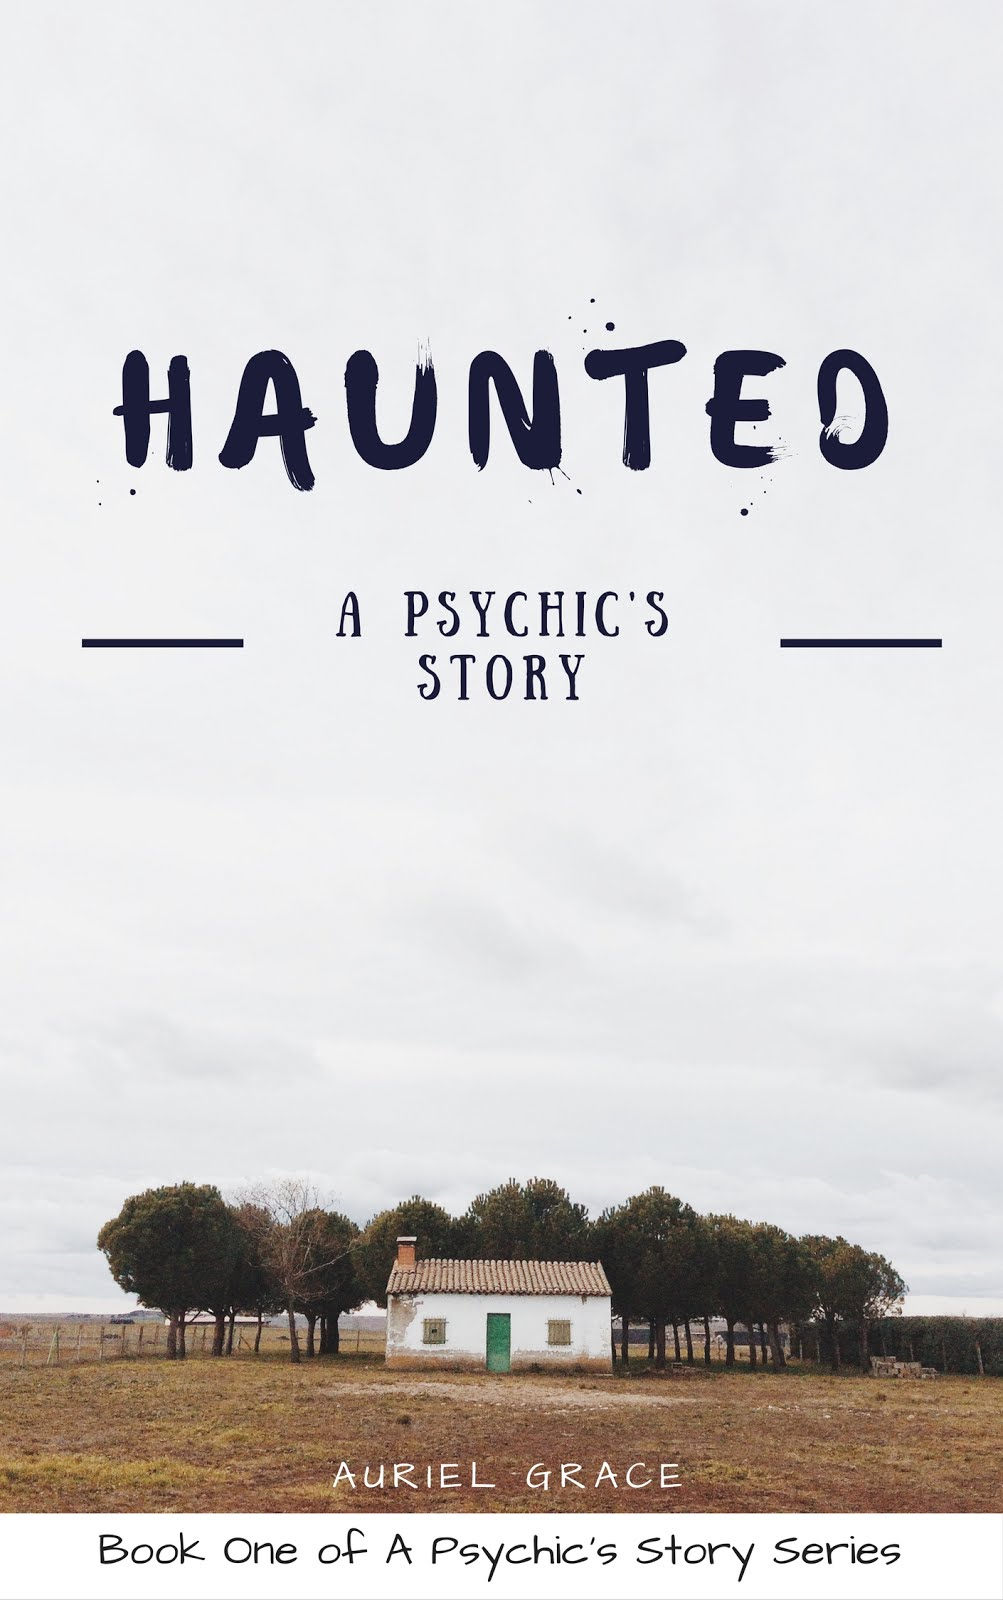 Haunted - A Psychic's Story